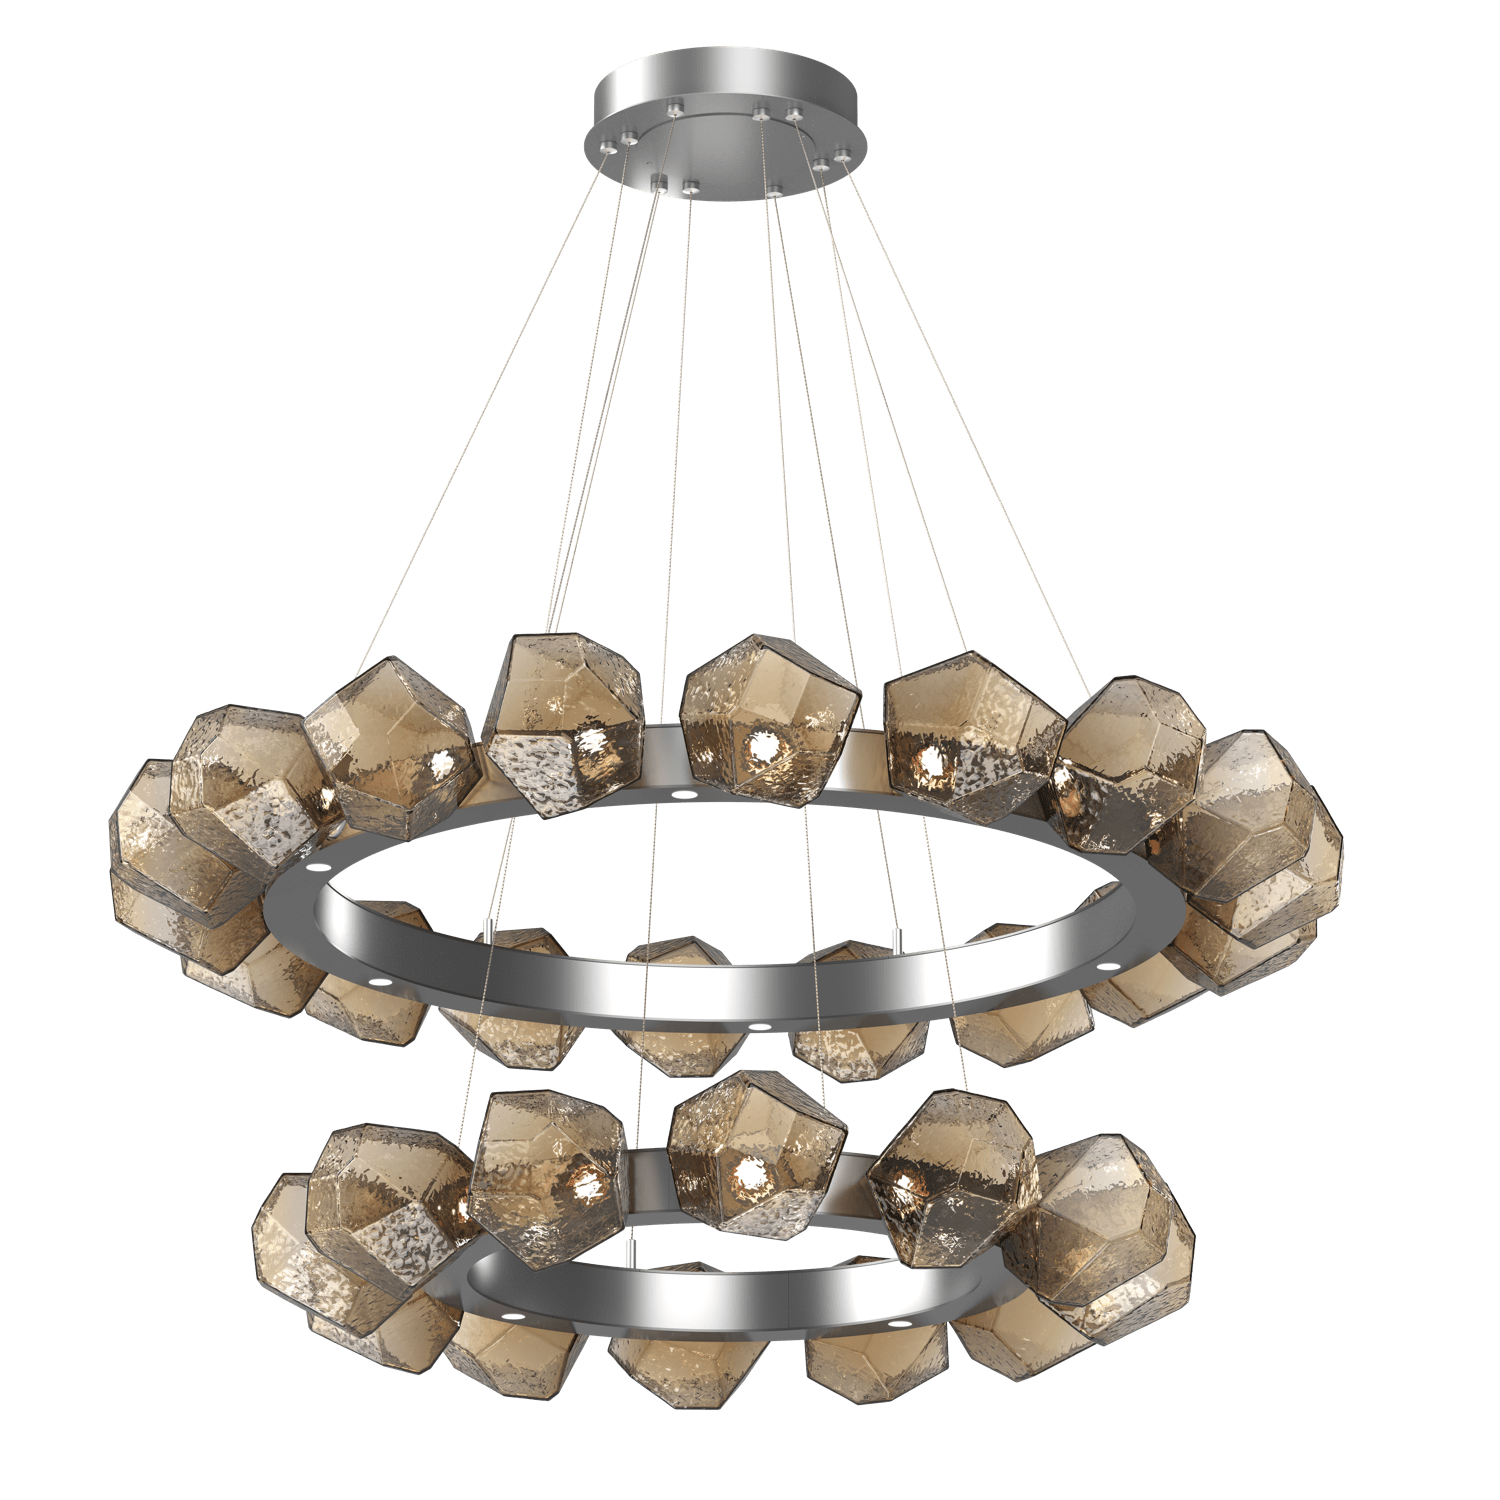 CHB0039-2T-CS-B-Hammerton-Studio-Gem-48-inch-two-tier-radial-ring-chandelier-with-classic-silver-finish-and-bronze-blown-glass-shades-and-LED-lamping